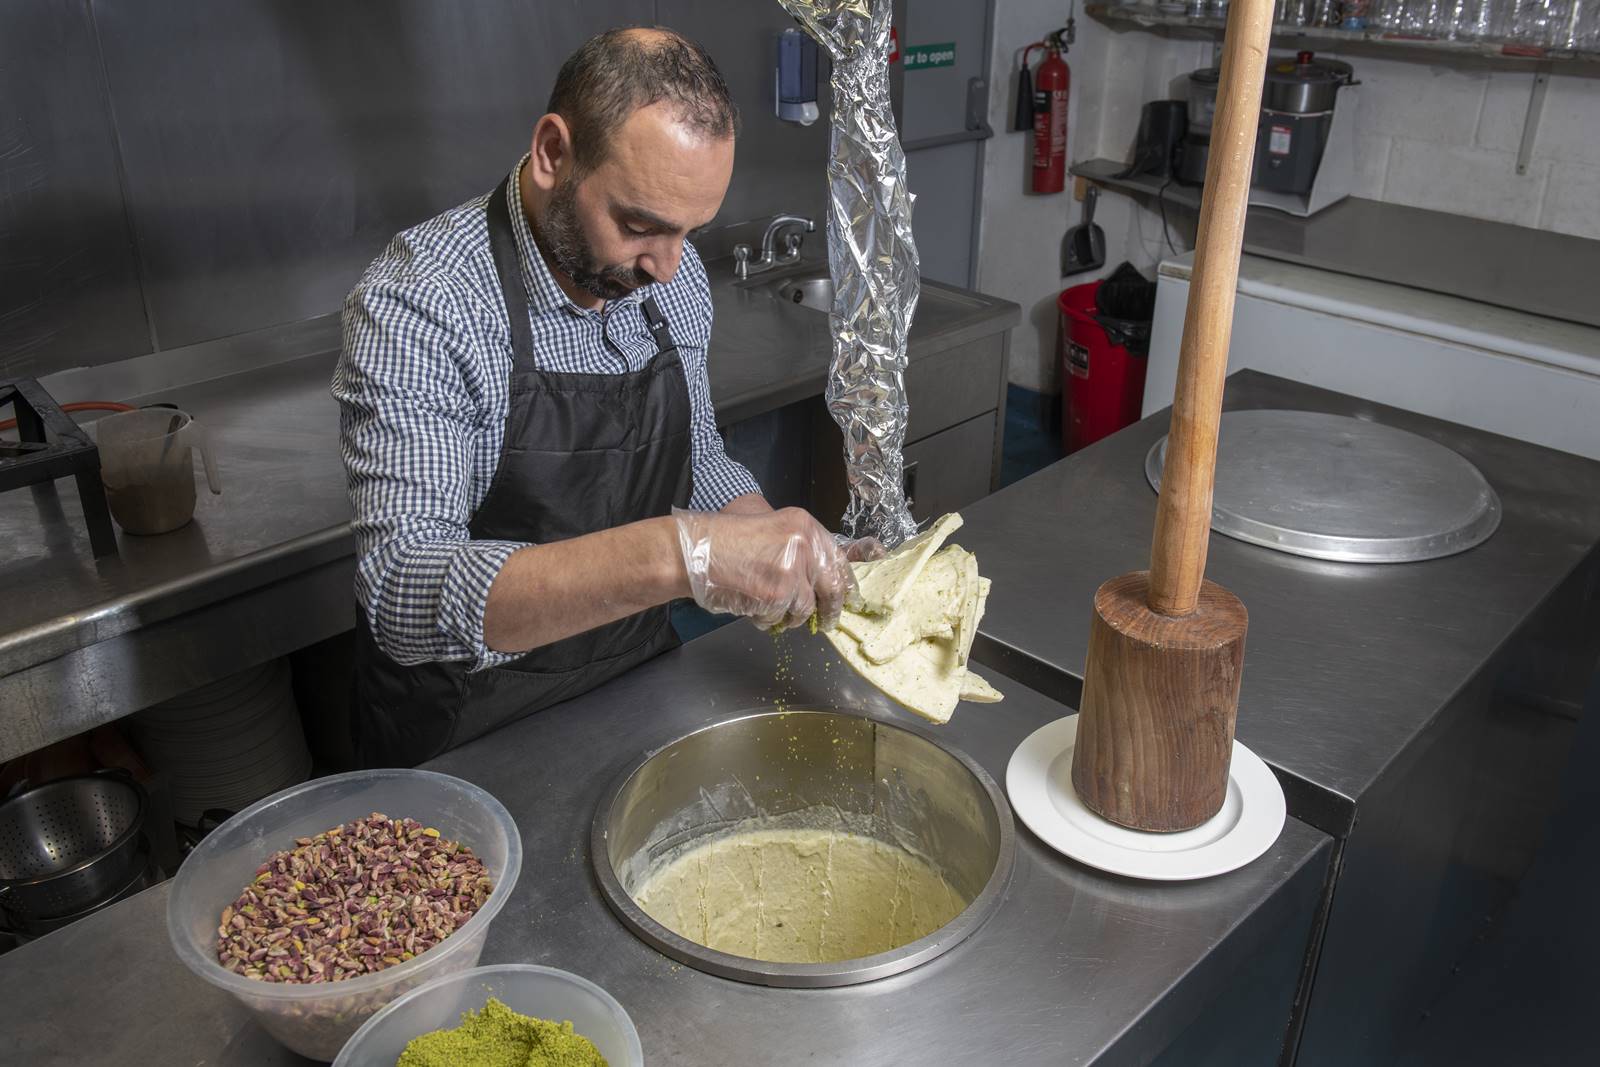 How to make Syrian ice cream, booza
Asami cuts out slices of the frozen mixture lined inside the metal containers.